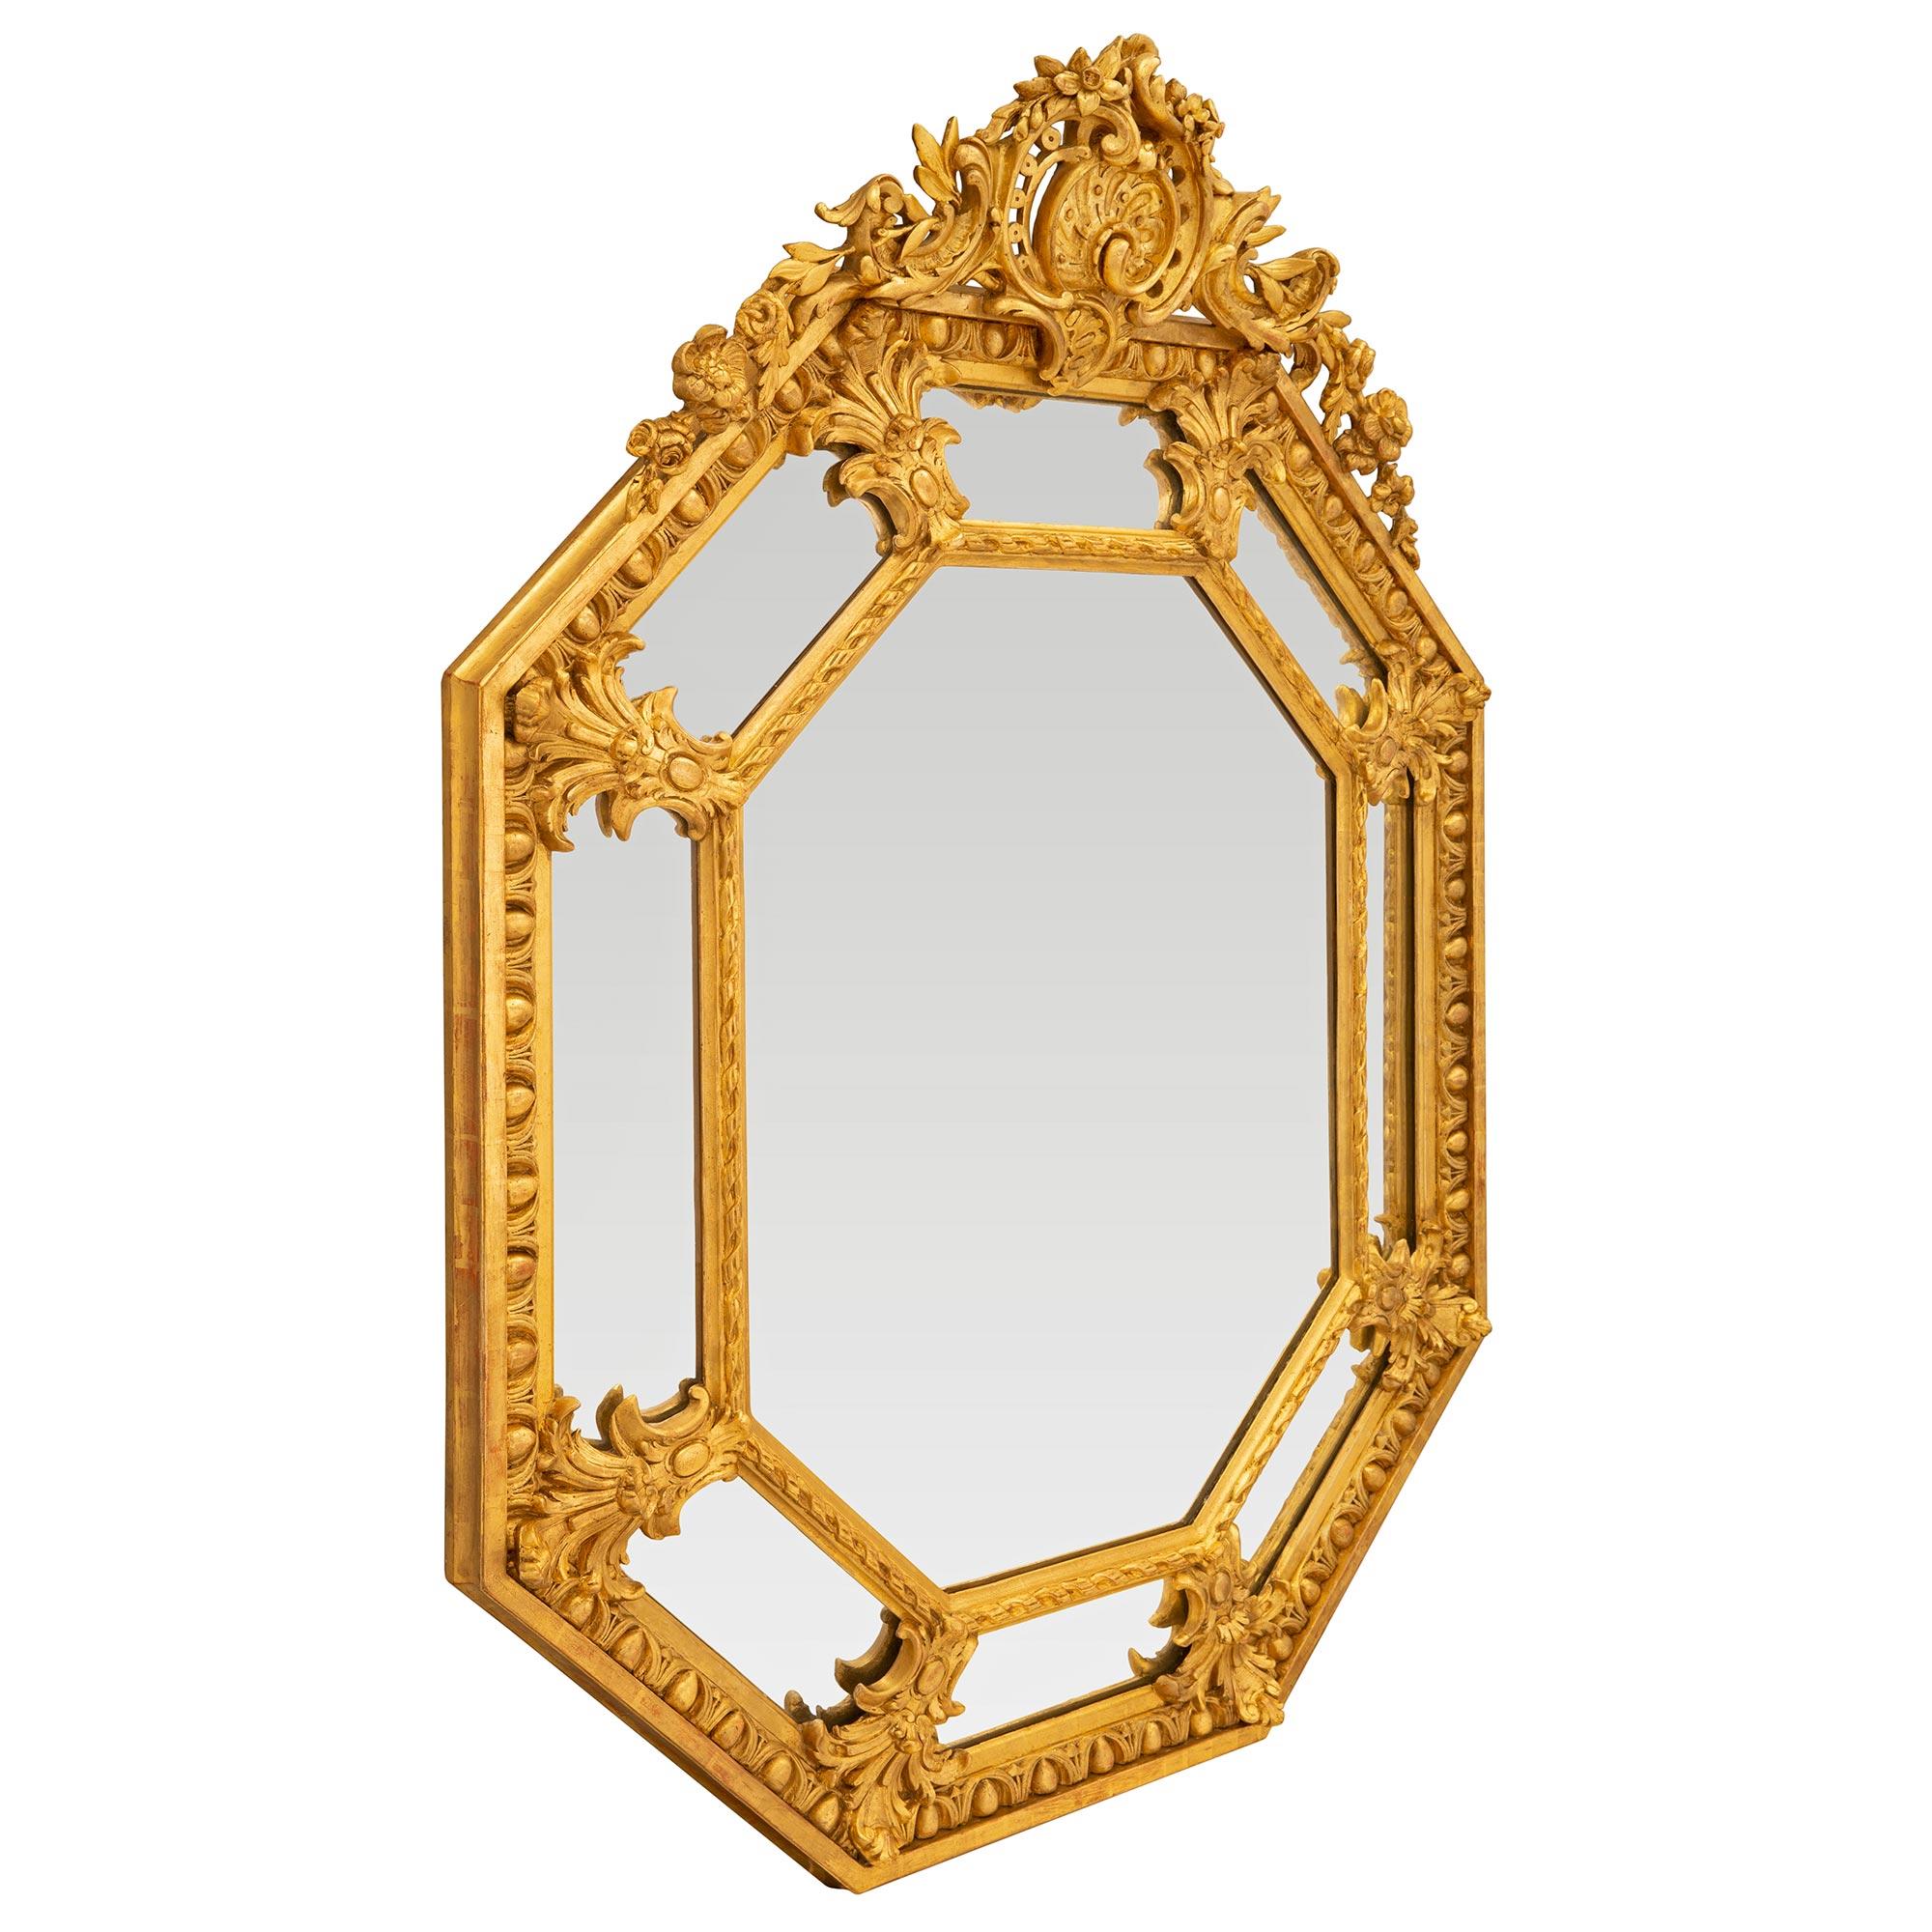 A striking French 19th century Louis XVI st. double framed octagonal giltwood mirror. The mirror retains all of its original mirror plates throughout with the central plate framed within a lovely finely detailed twisted ribbon wrap around band while